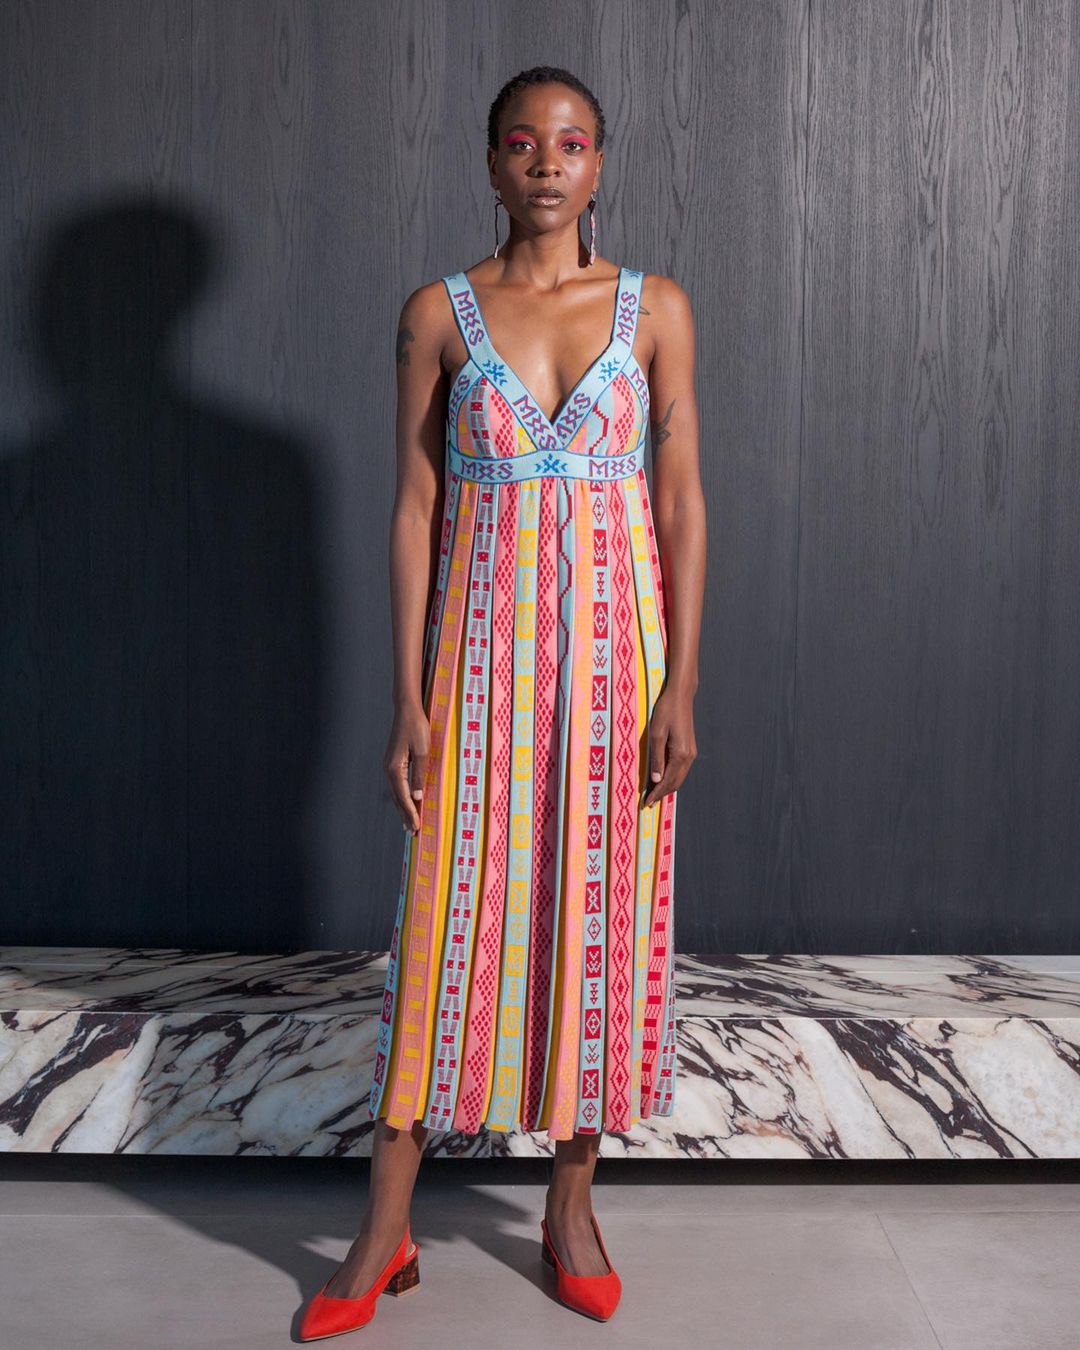 A pink, peach and yellow print gown from Maxhosa - a south African loungewear brand